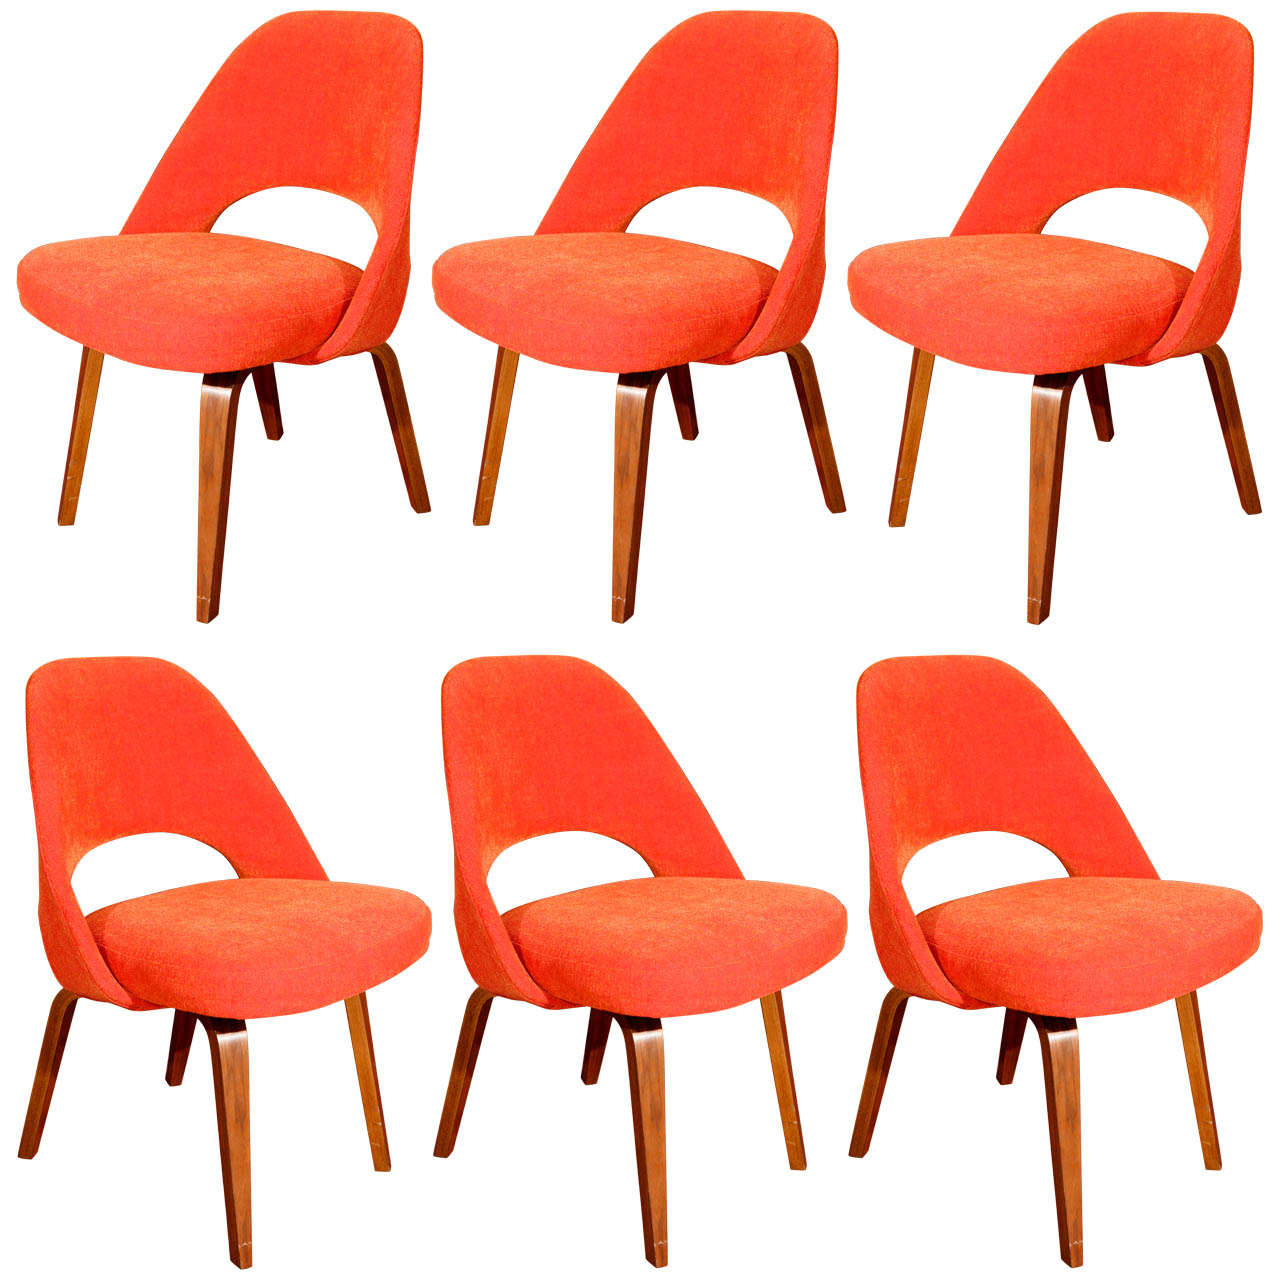 Saarinen Executive Chairs with Wood Legs by Knoll, Set of 6